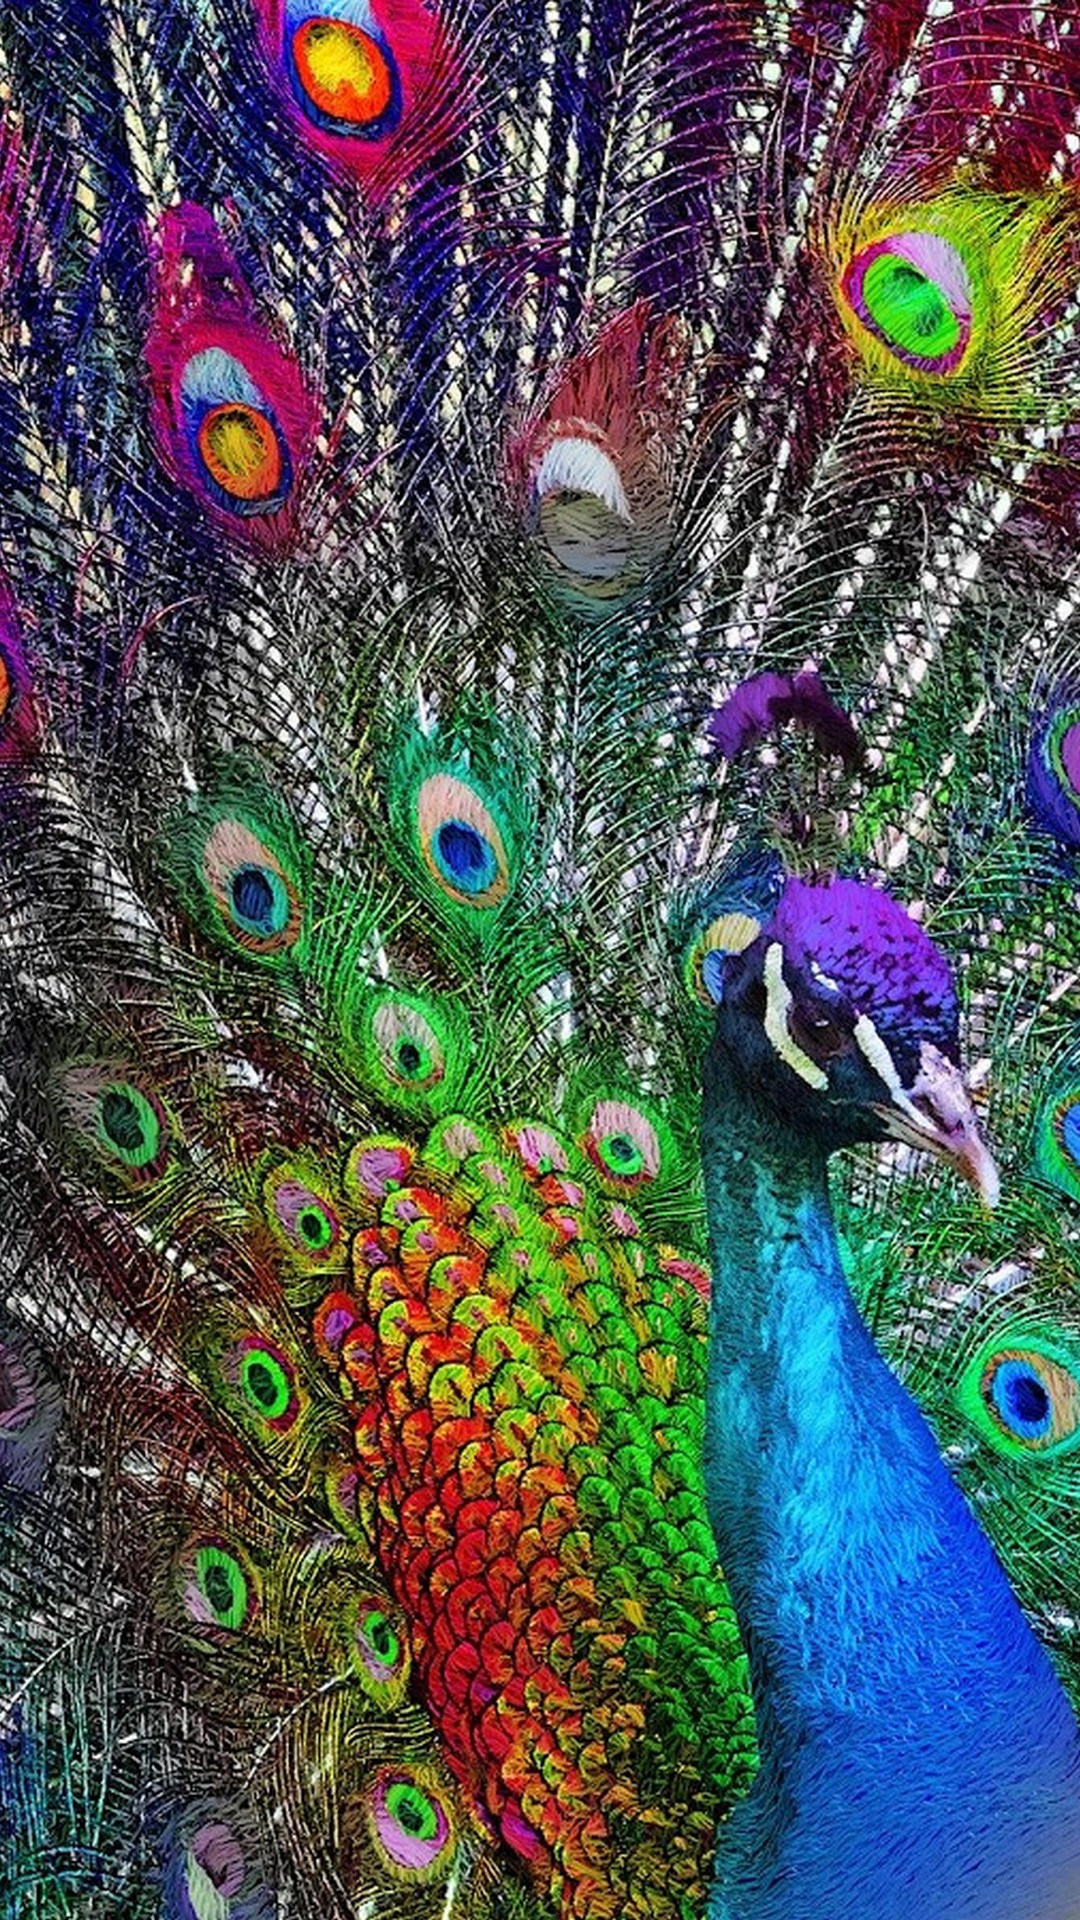 Purple Peacock Wallpaper For iPhone resolution 1080x1920